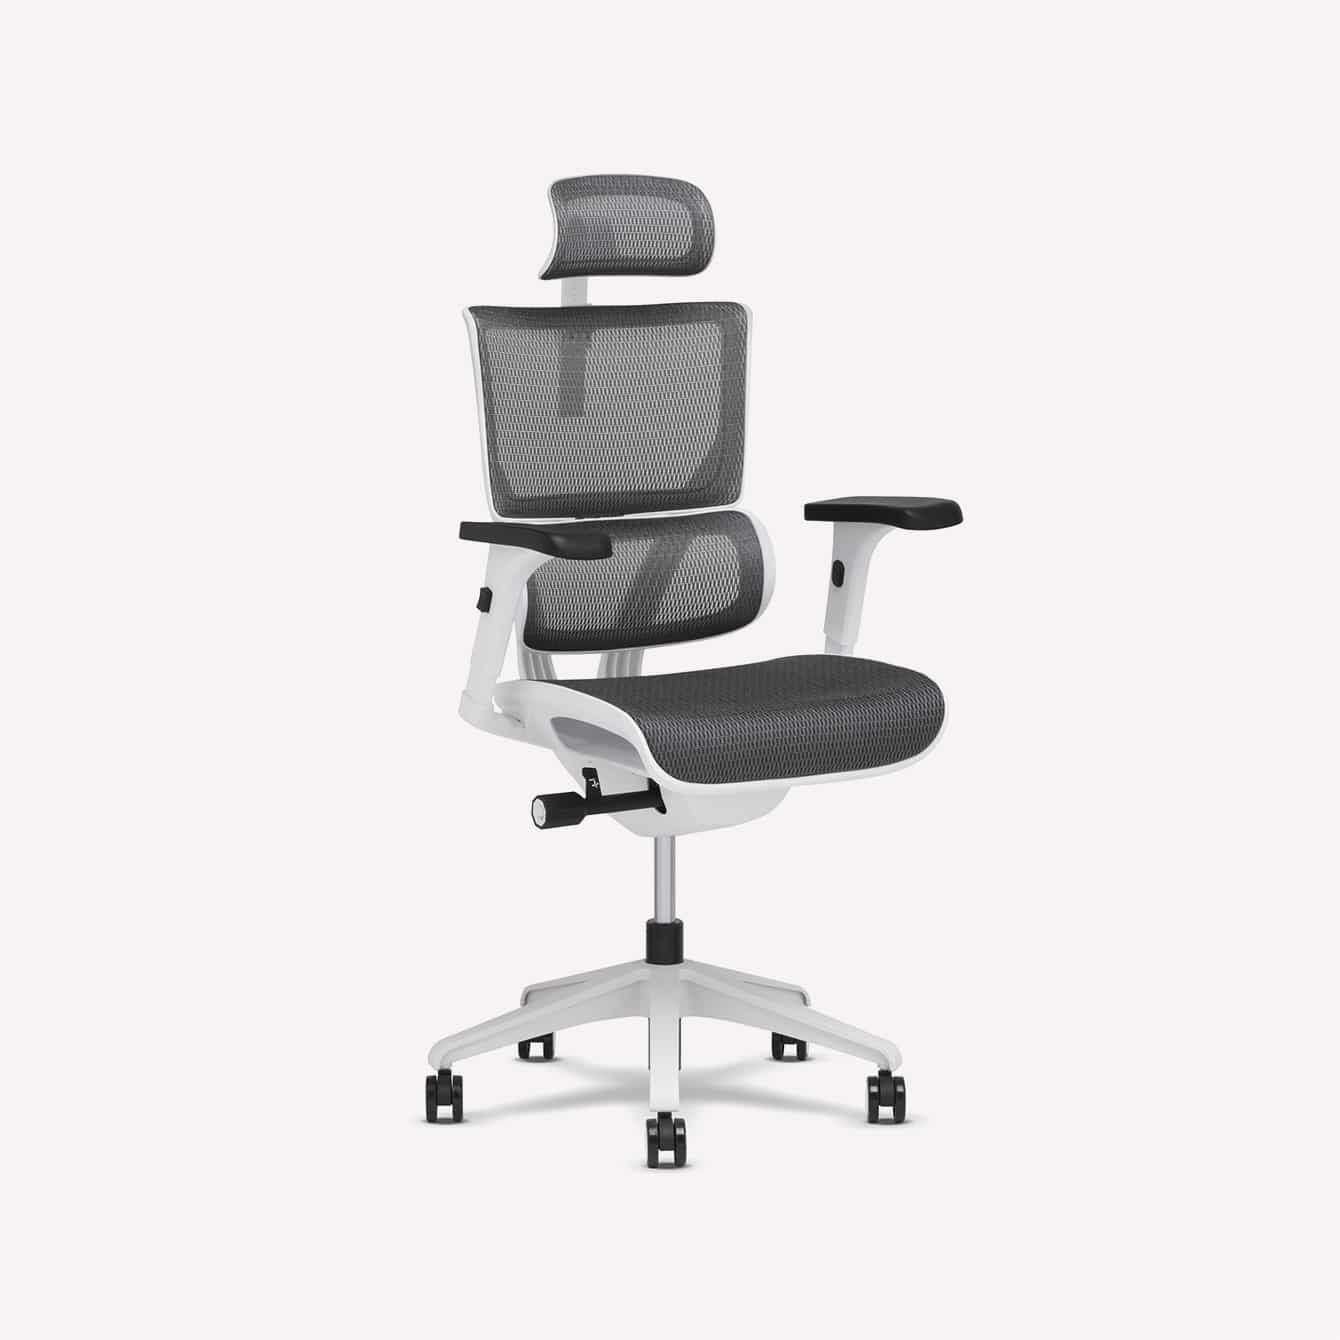 The 9 Best Desk Chairs for Short People - The Modest Man